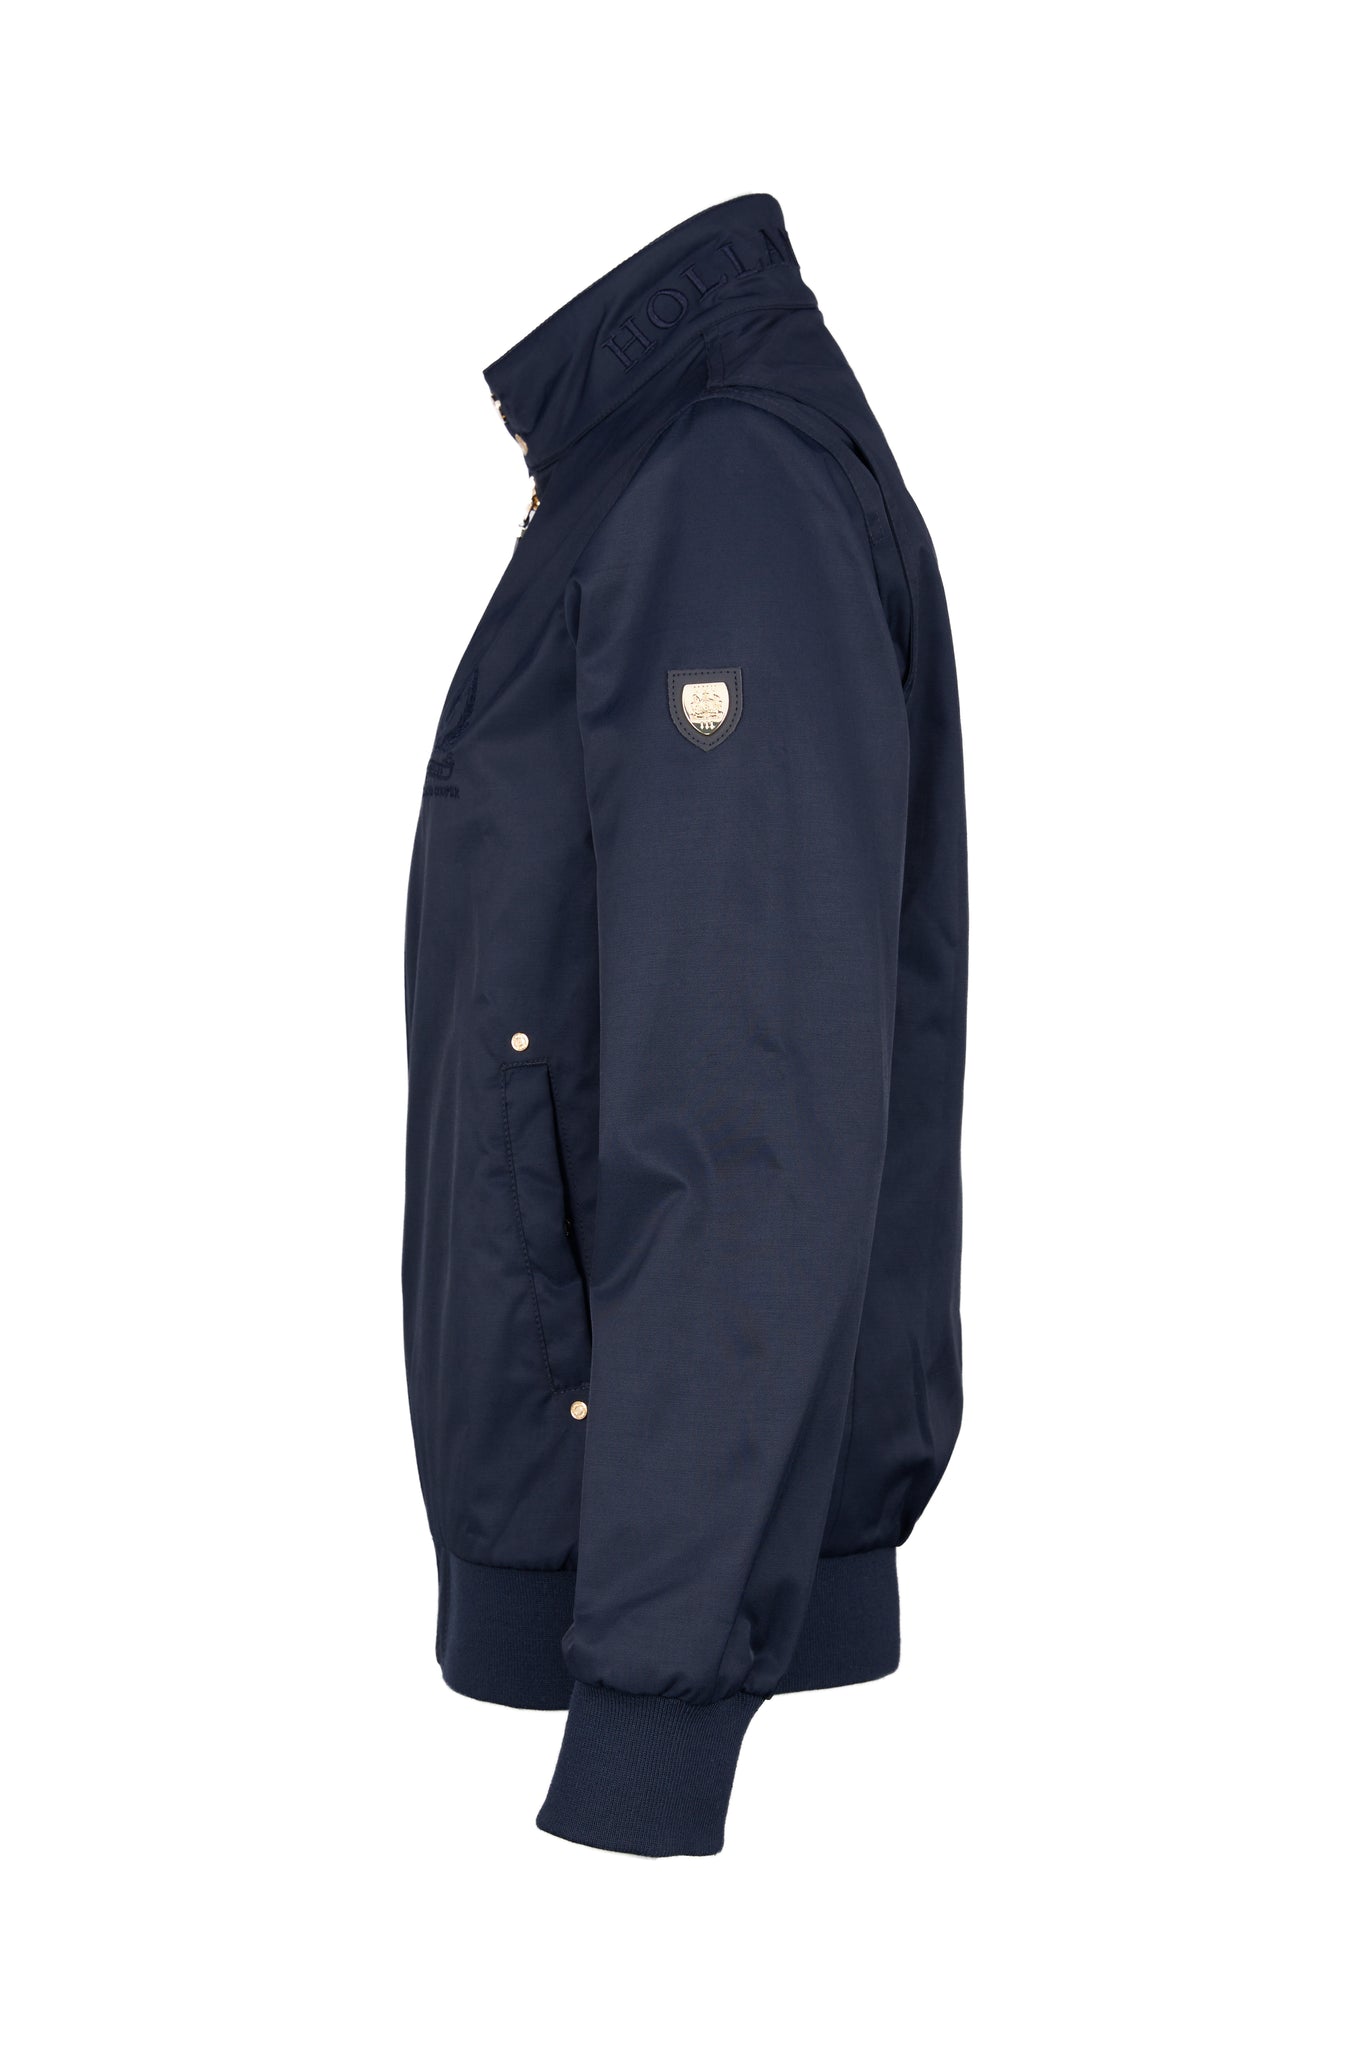 side of Womens navy 100% waterproof hoodless bomber style jacket with ribbed cuffs and hem, two pockets on hips a full zip down the centre front showing shield badge detail to the upper arm side pockets and navy embroidery to the collar 